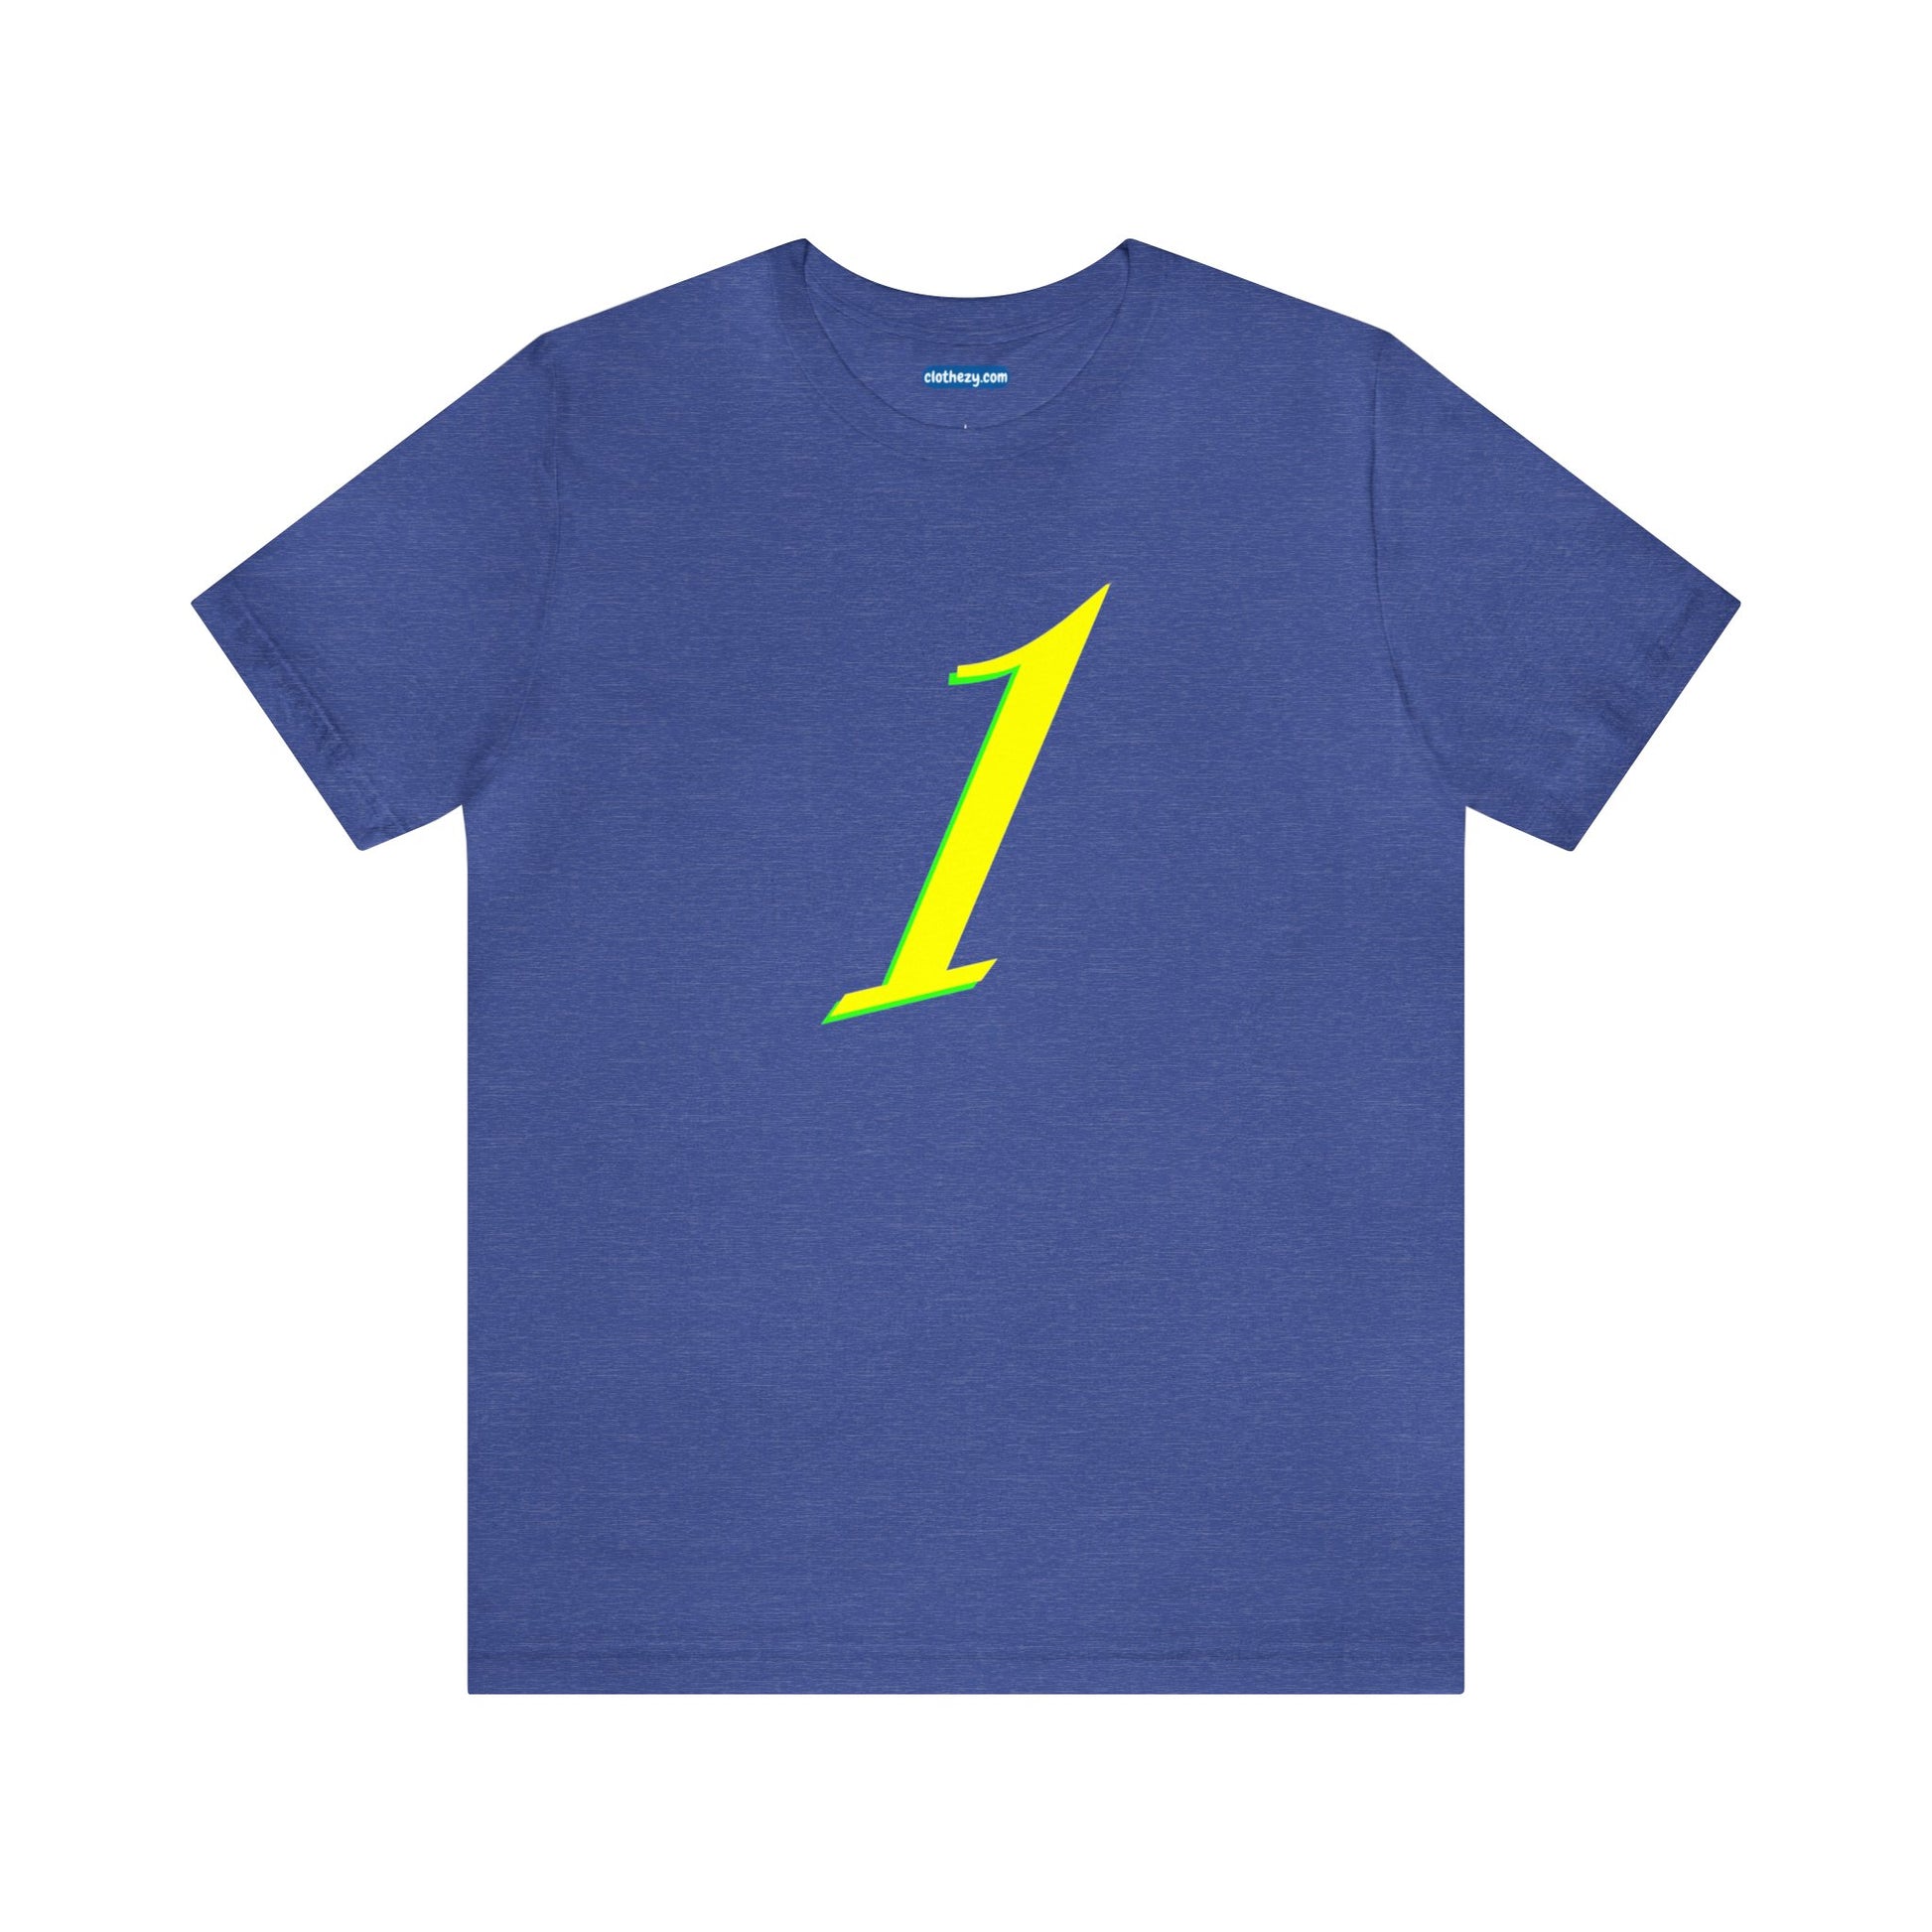 Number 1 Design - Soft Cotton Tee for birthdays and celebrations, Gift for friends and family, Multiple Options by clothezy.com in Navy Size Small - Buy Now